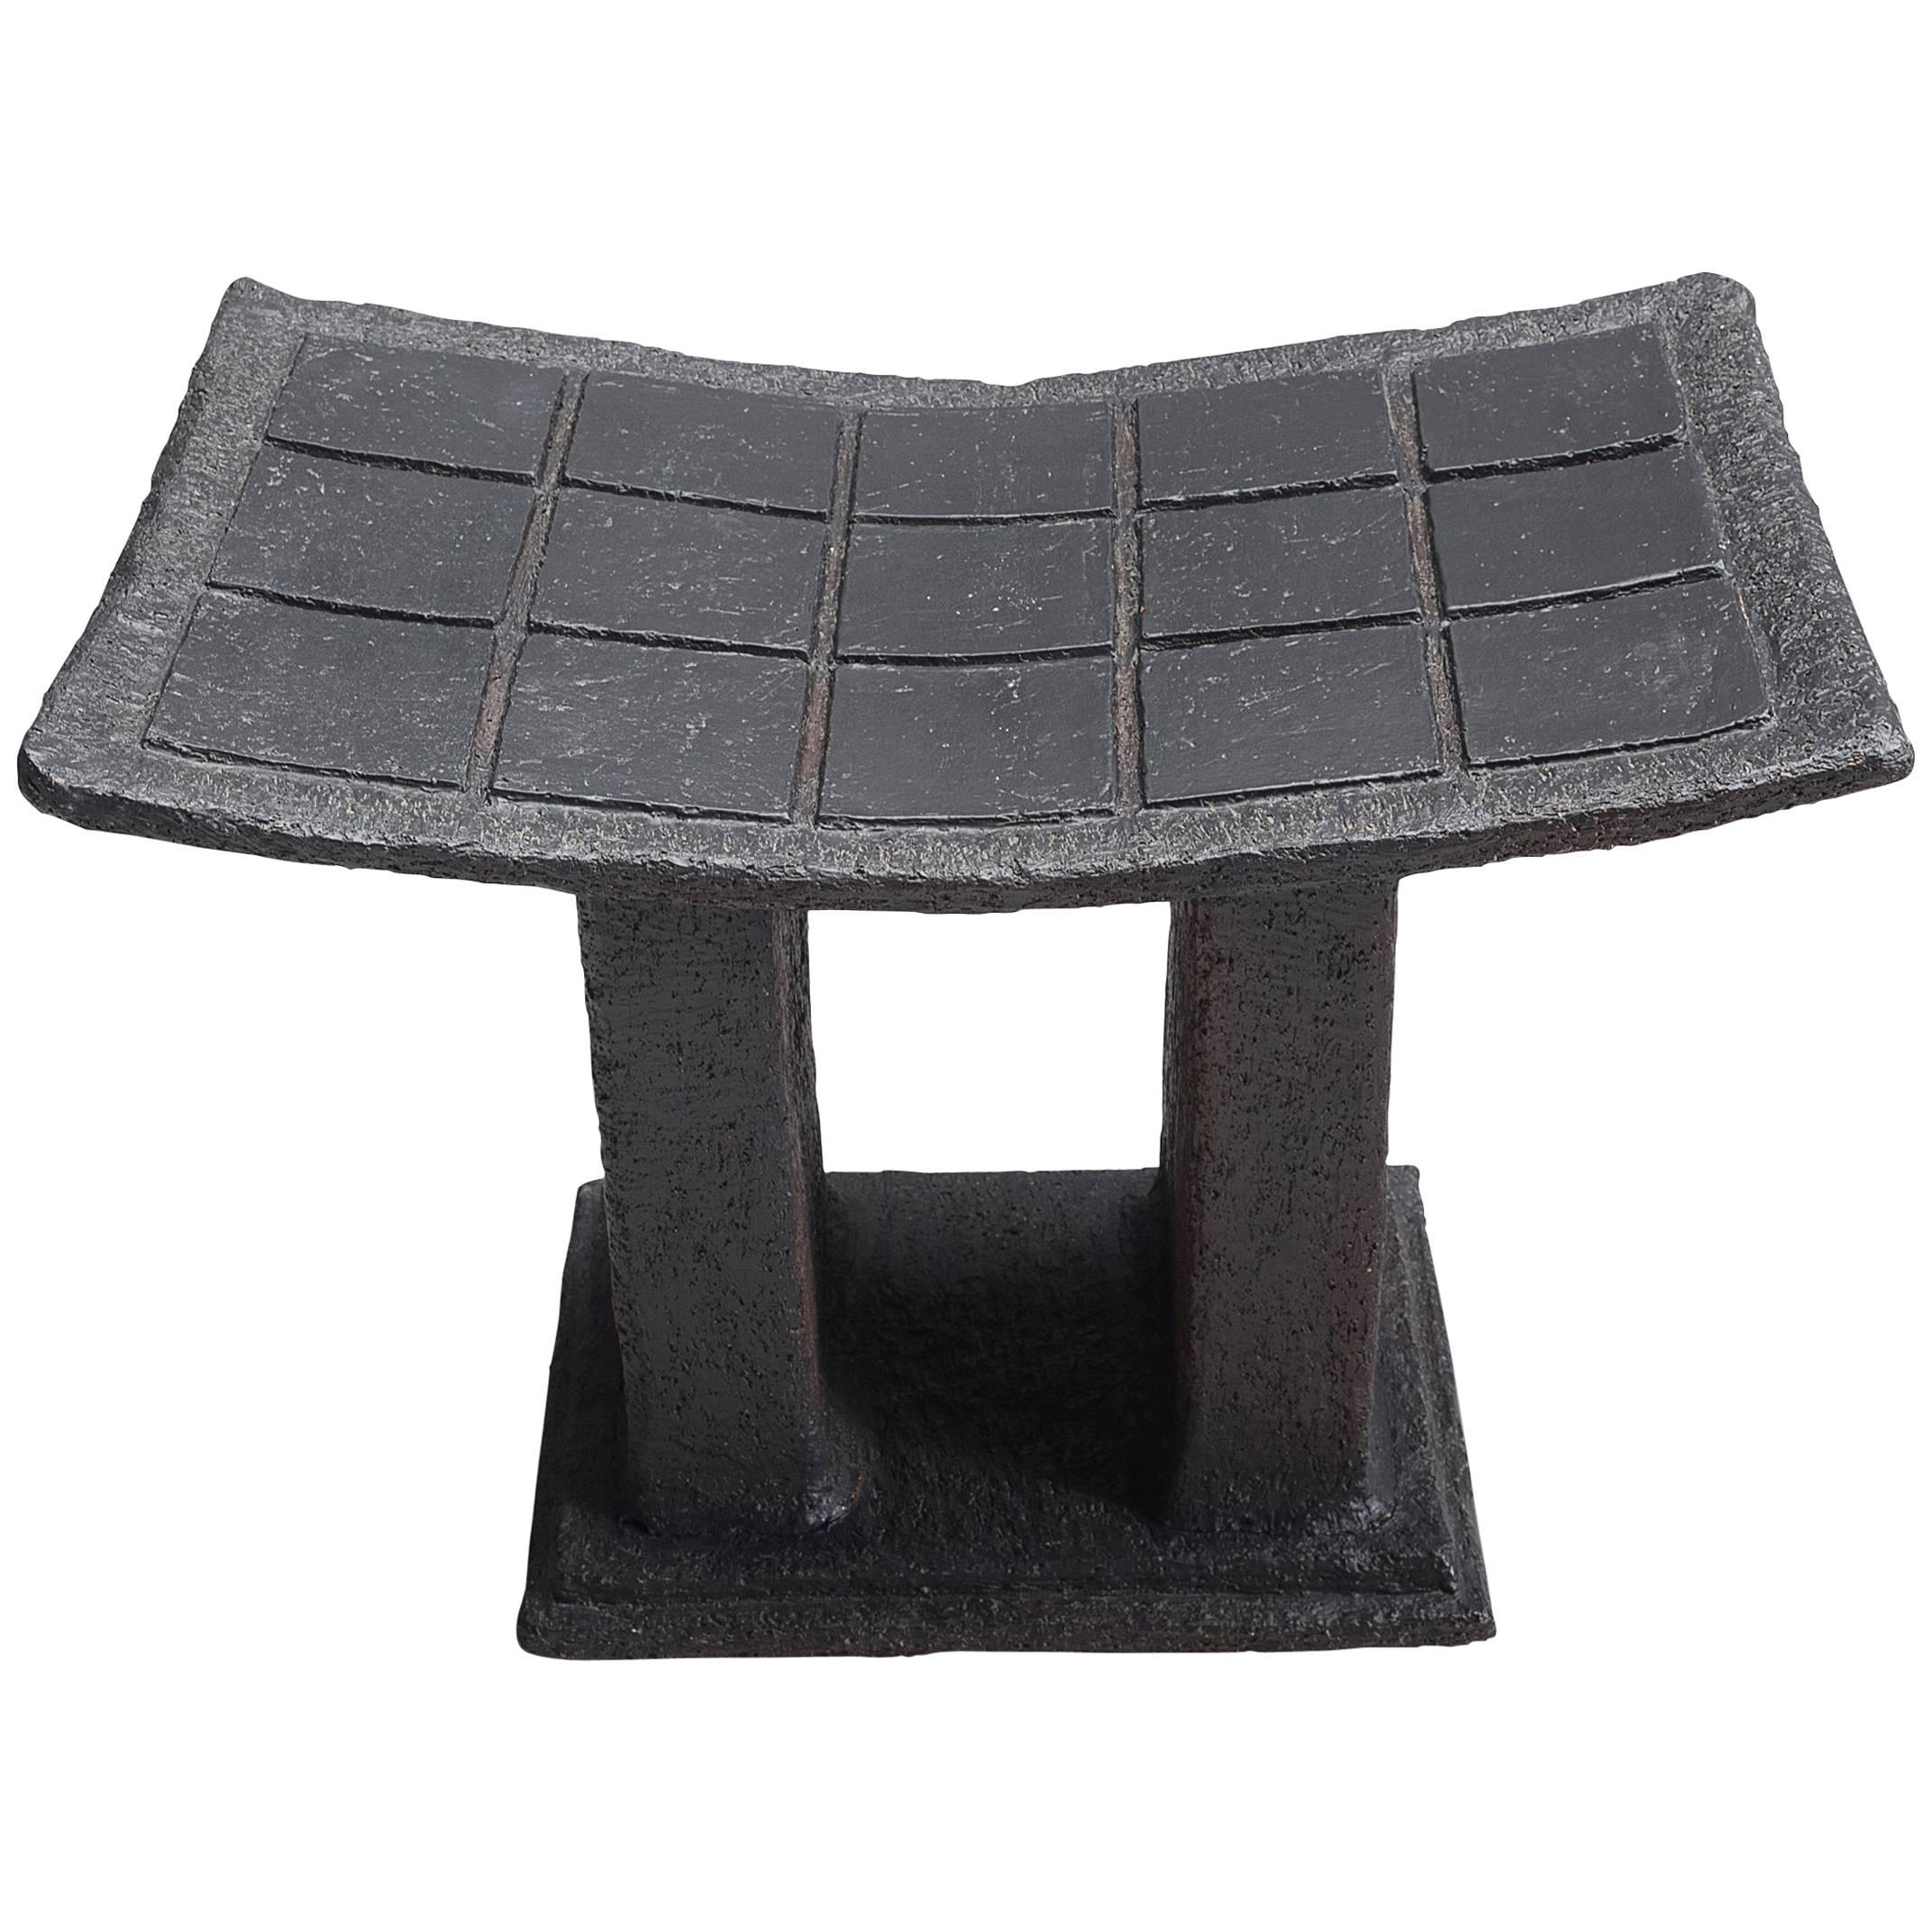 Japonism Stool in Antracite Stone, 1970s